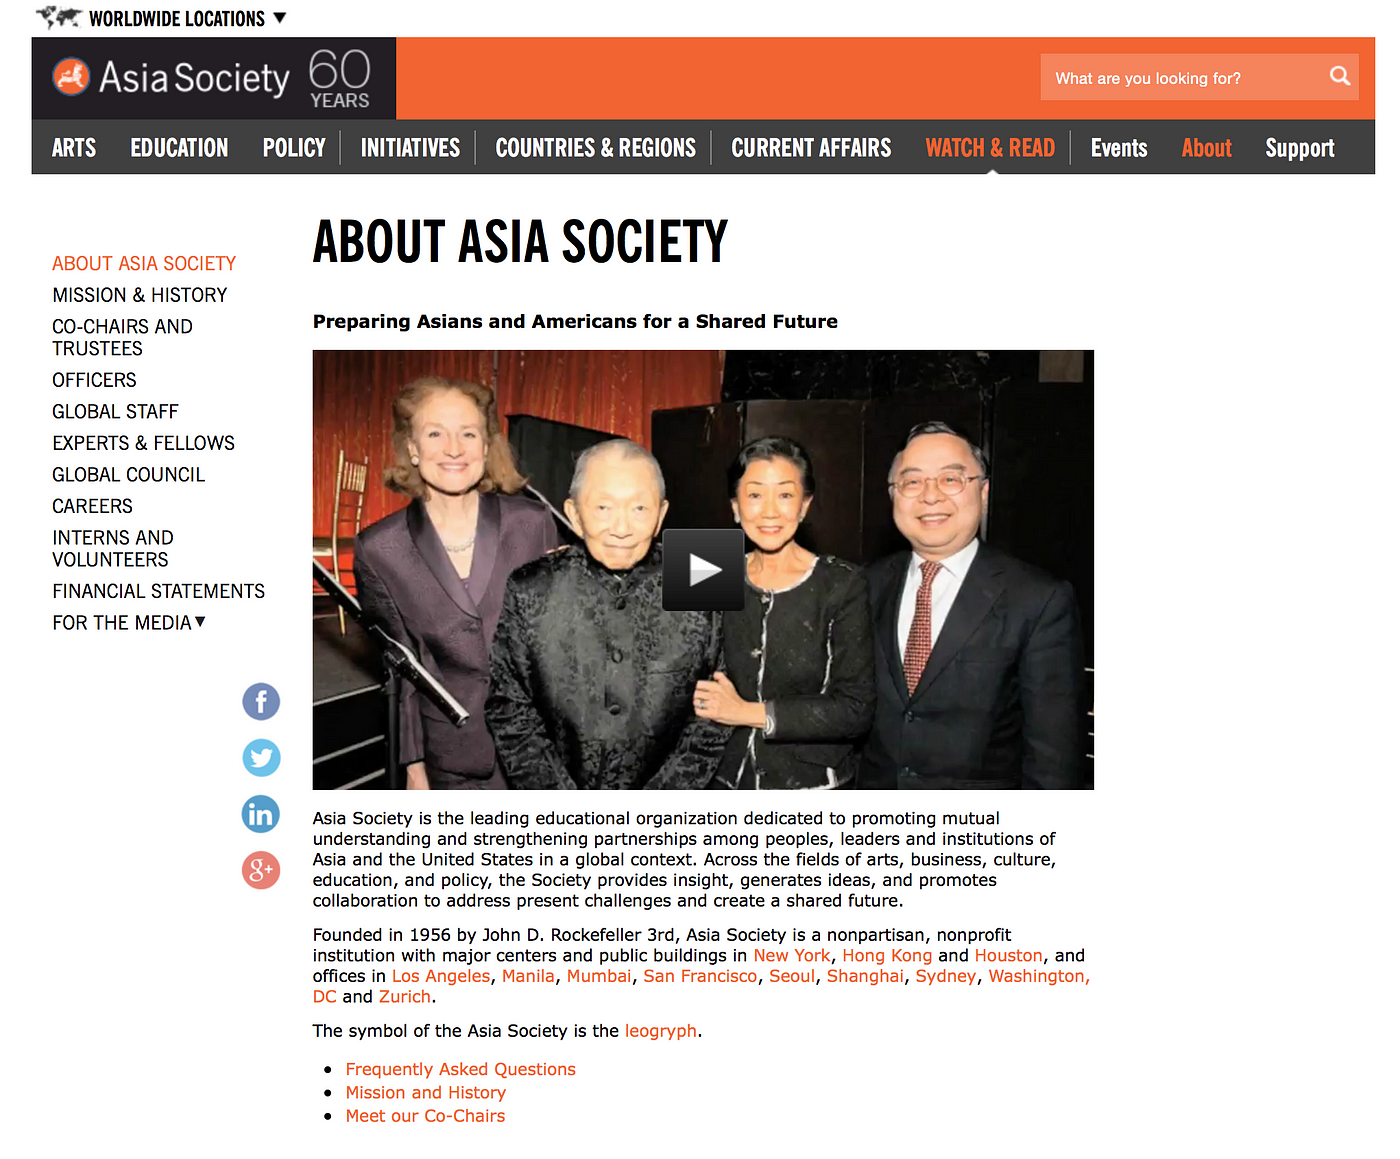 John D. Rockefeller 3rd, the Asia Society, and 60 Years